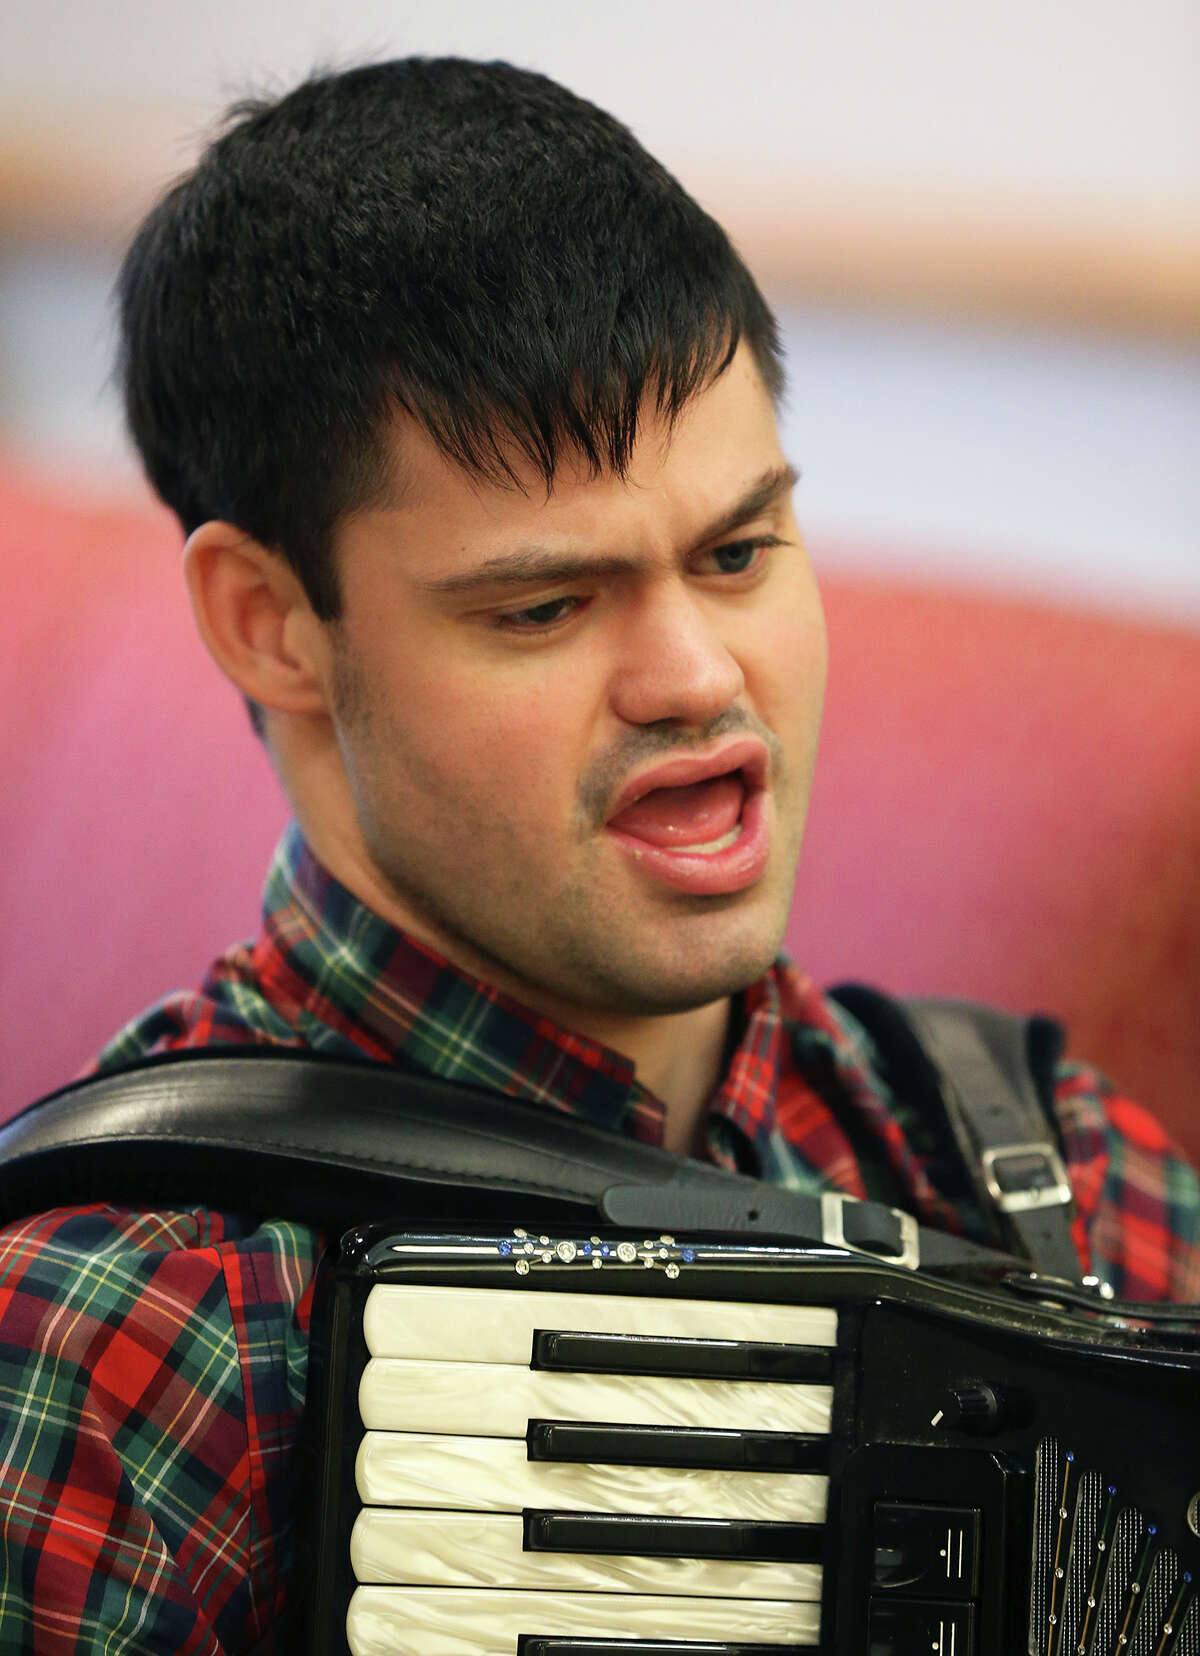 John McDonald, who has the developmental disorder Asperger's syndrome, which affects his ability to socialize and communicate effectively, performs a song on the accordion at the Kendall House Retirement Home in Boerne on Wednesday. McDonald is a good example of what autism experts advise all parents of autistic kids to do: Identify and cultivate their child’s special interests and talents as early as possible to improve the odds they’ll be able to make their own way in the world.